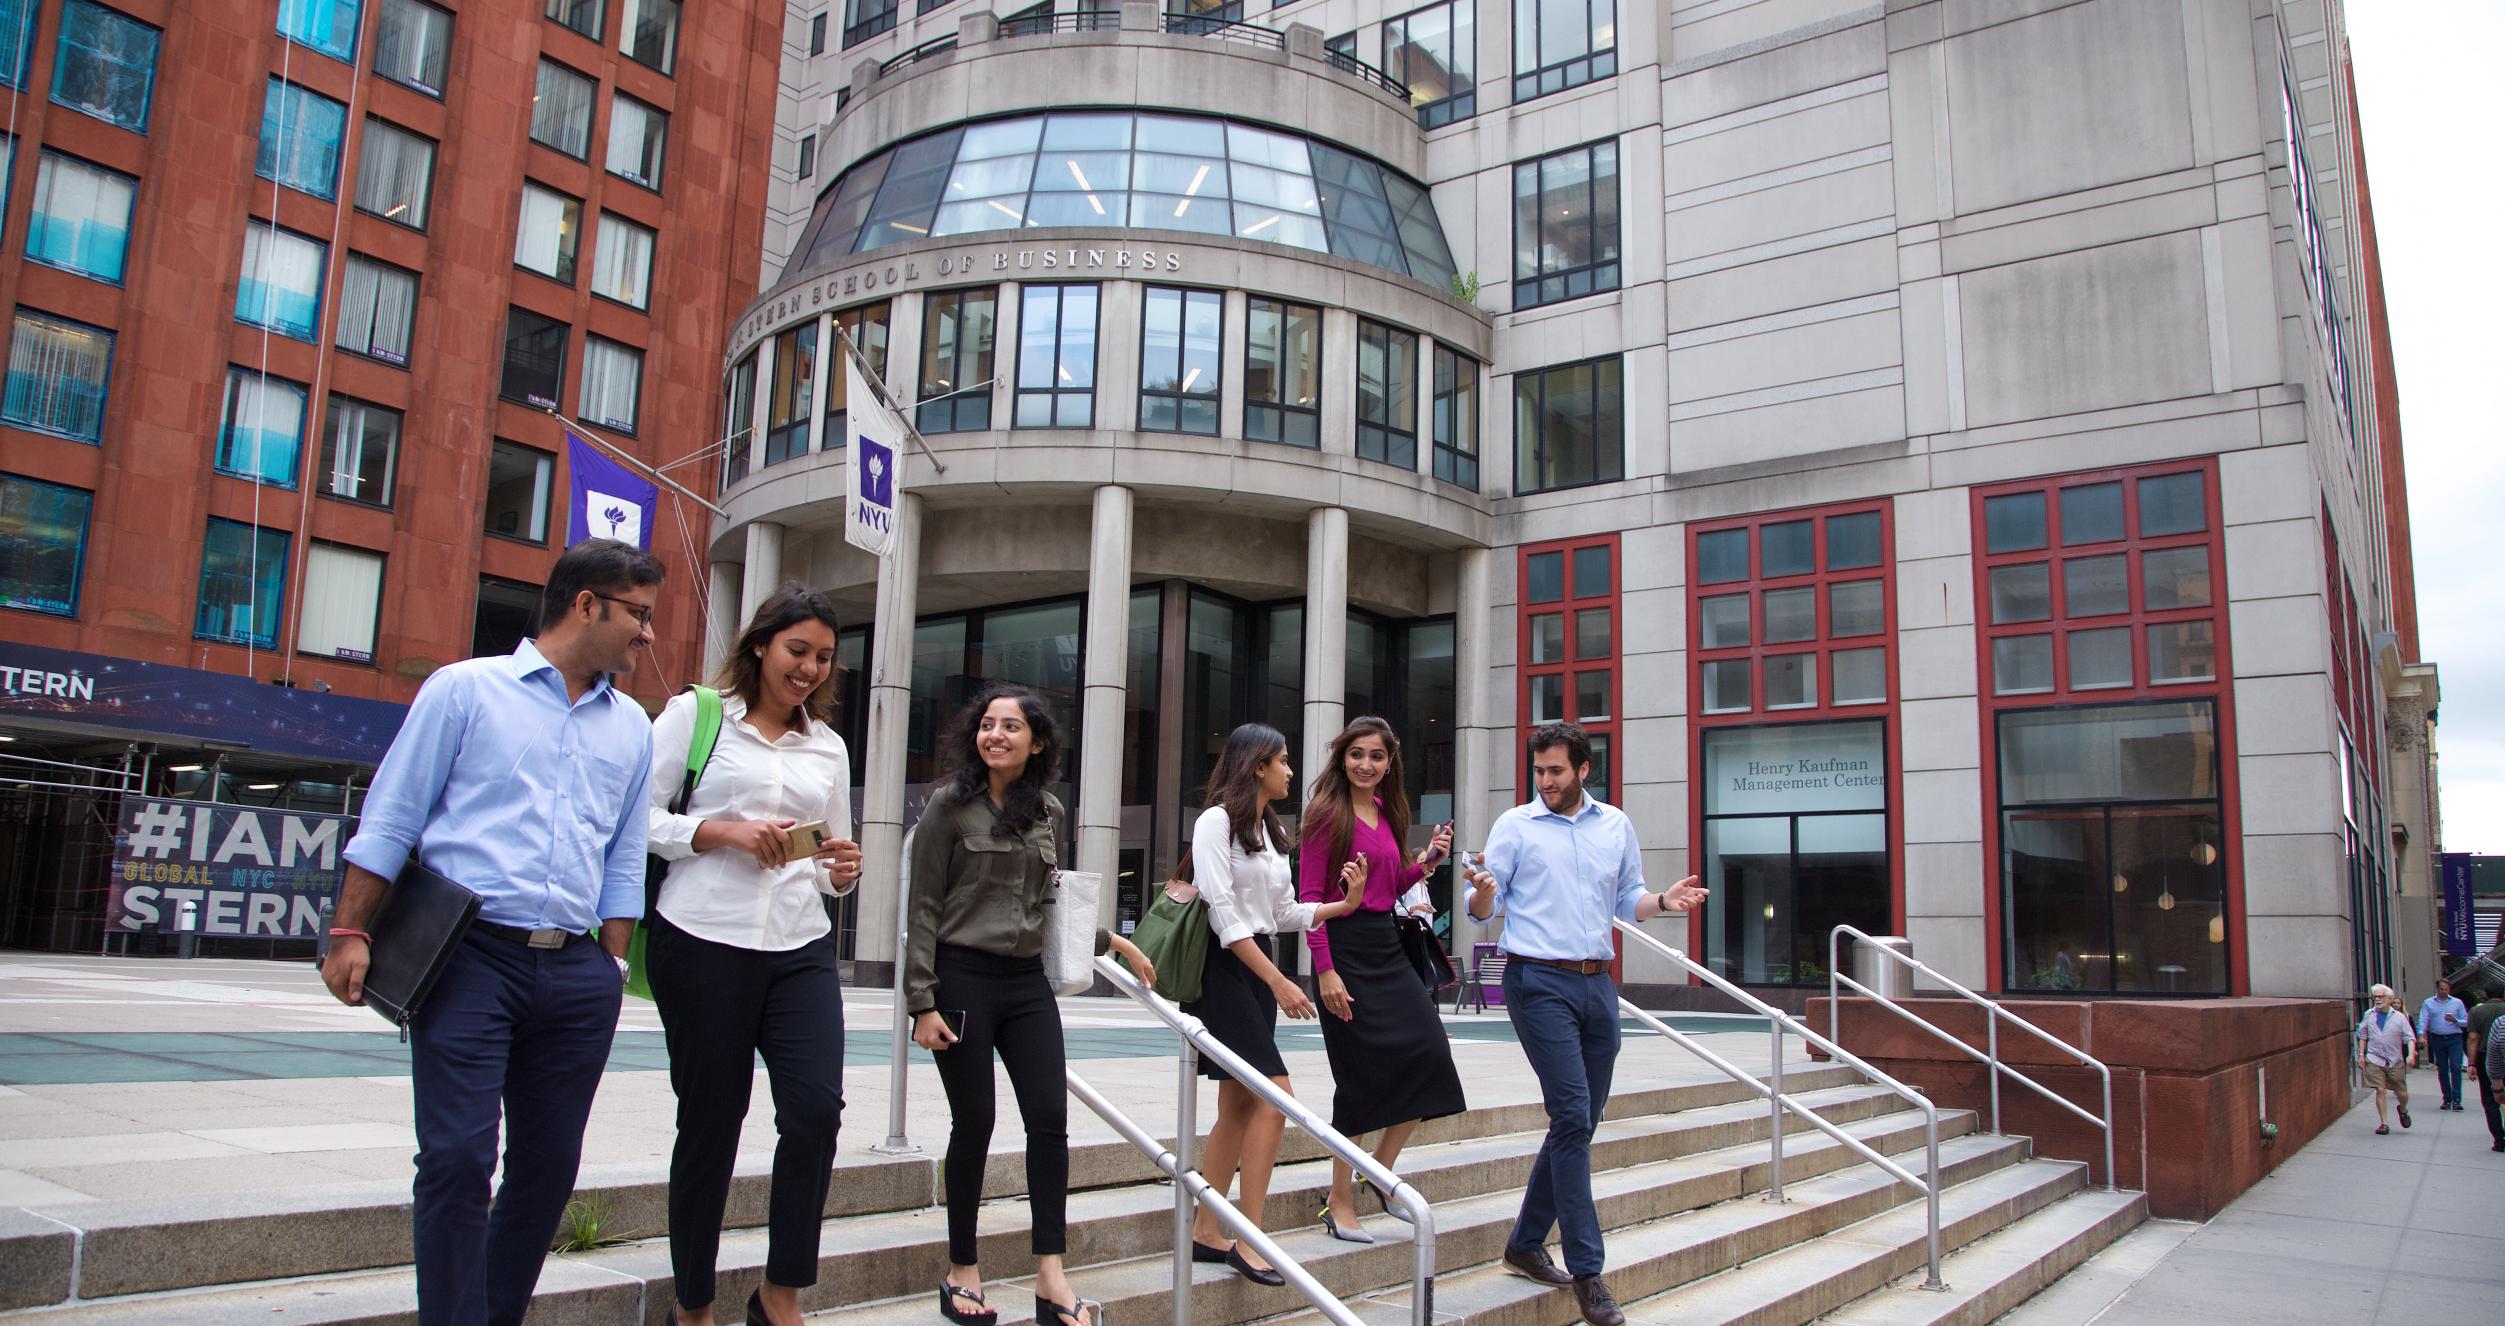 Nyu Mba Acceptance Rate CollegeLearners